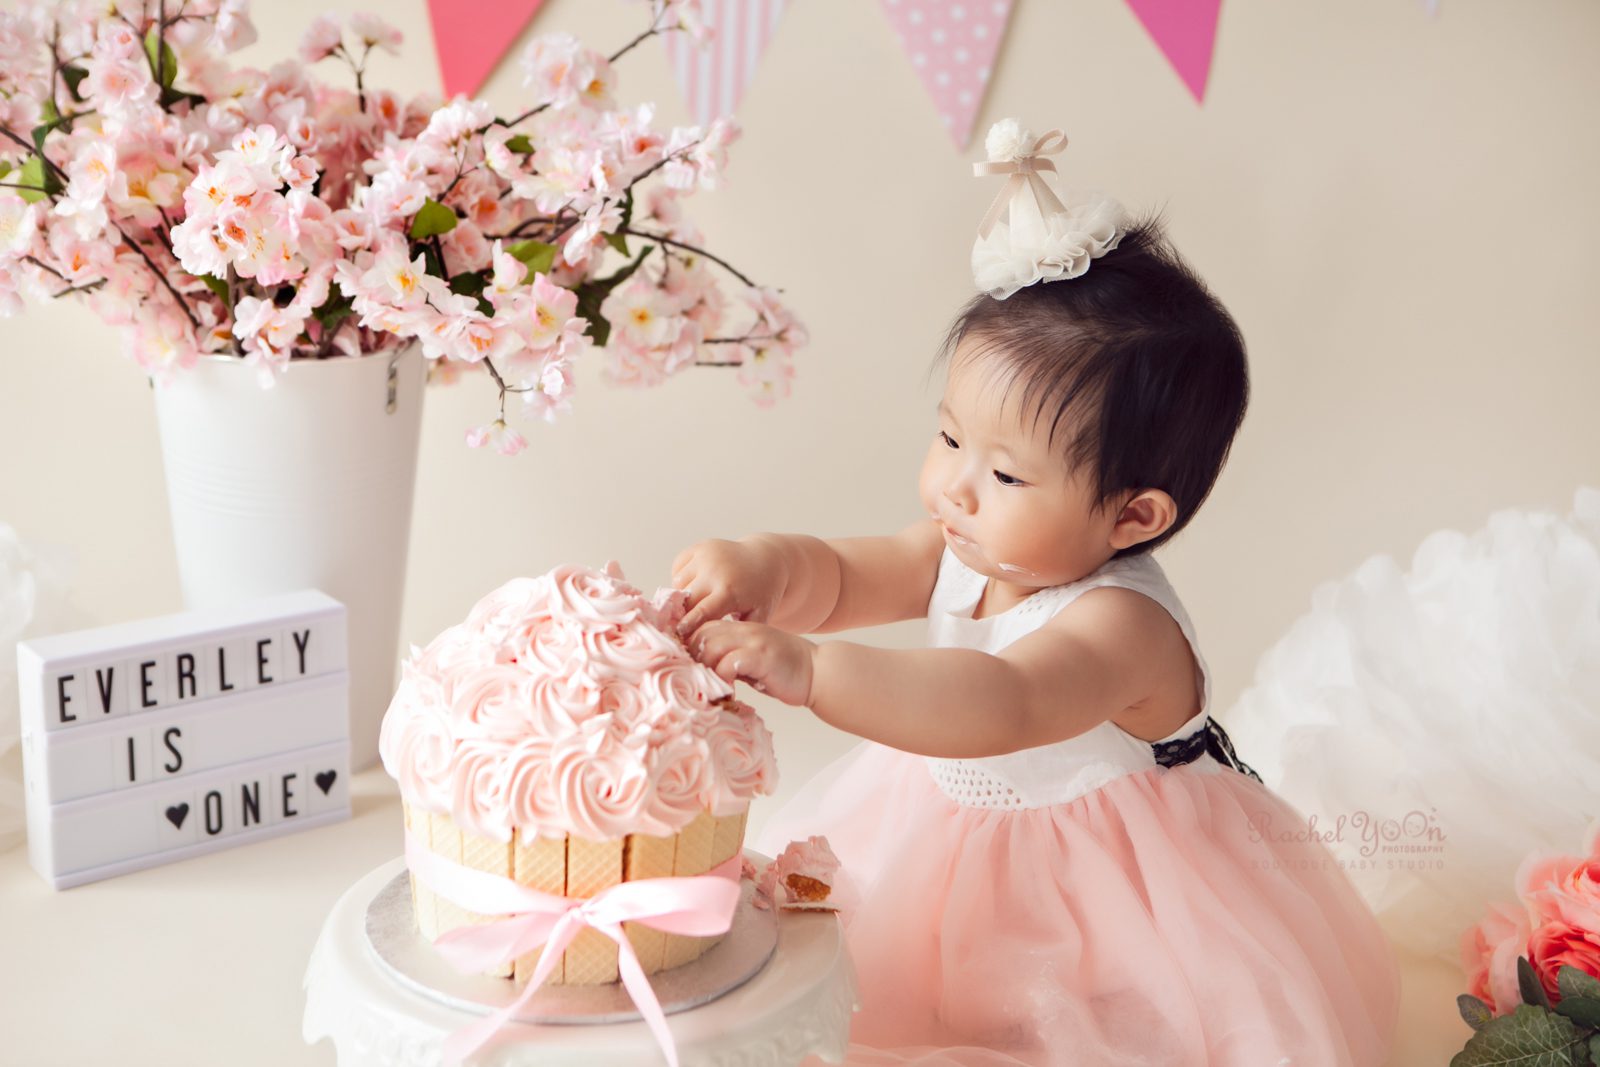 cake smash photography vancouver - pink and neutral theme